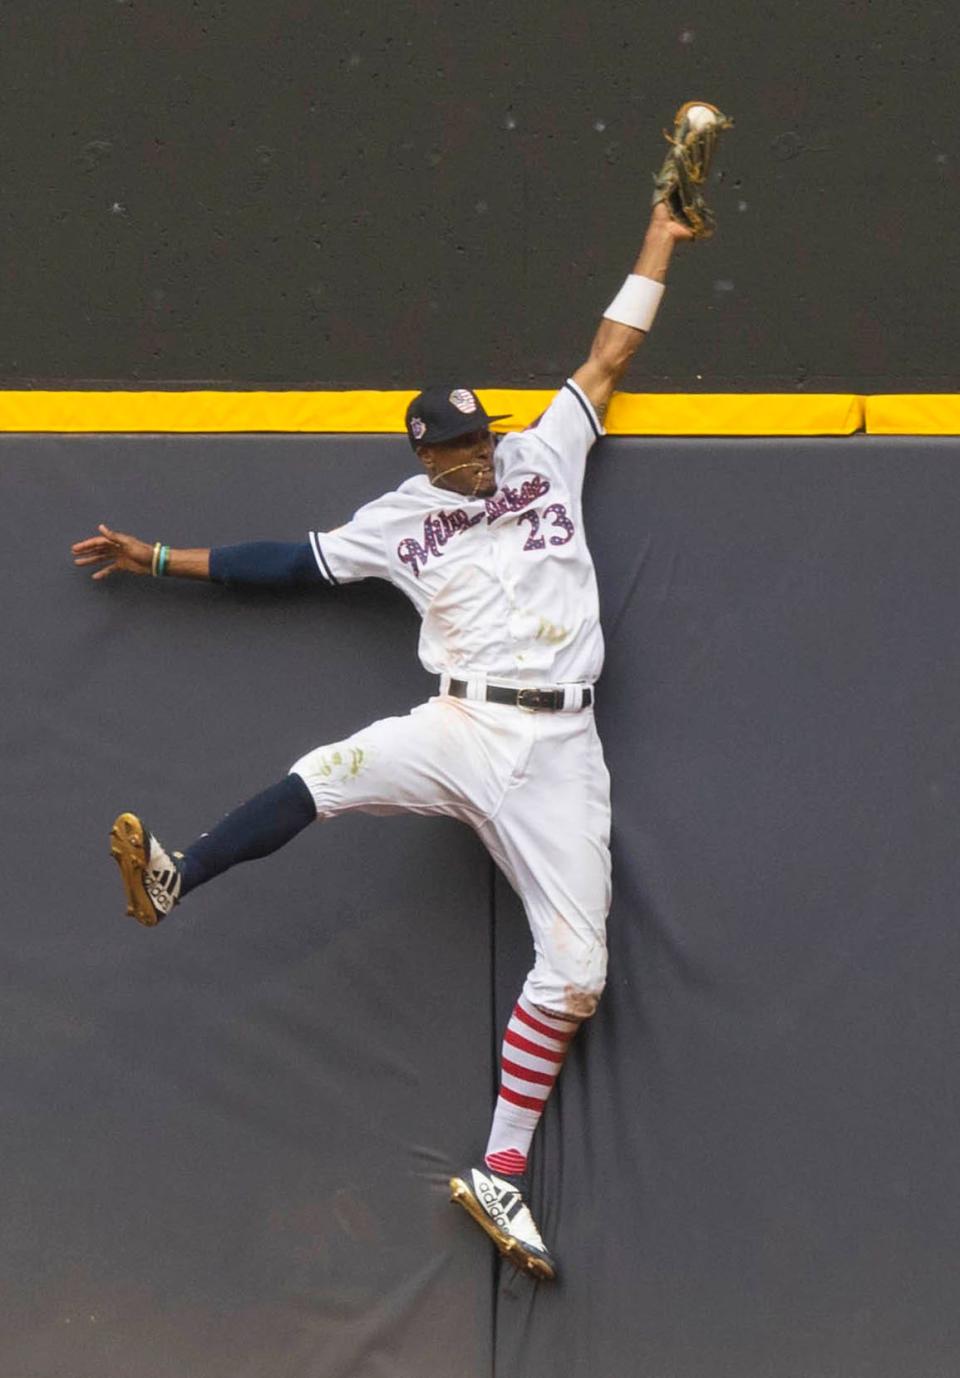 Brewers centerfielder Keon Broxton robs Brian Dozier of the Twins of a home run with a leaping catch against the wall in deep center during the ninth inning on Wednesday.